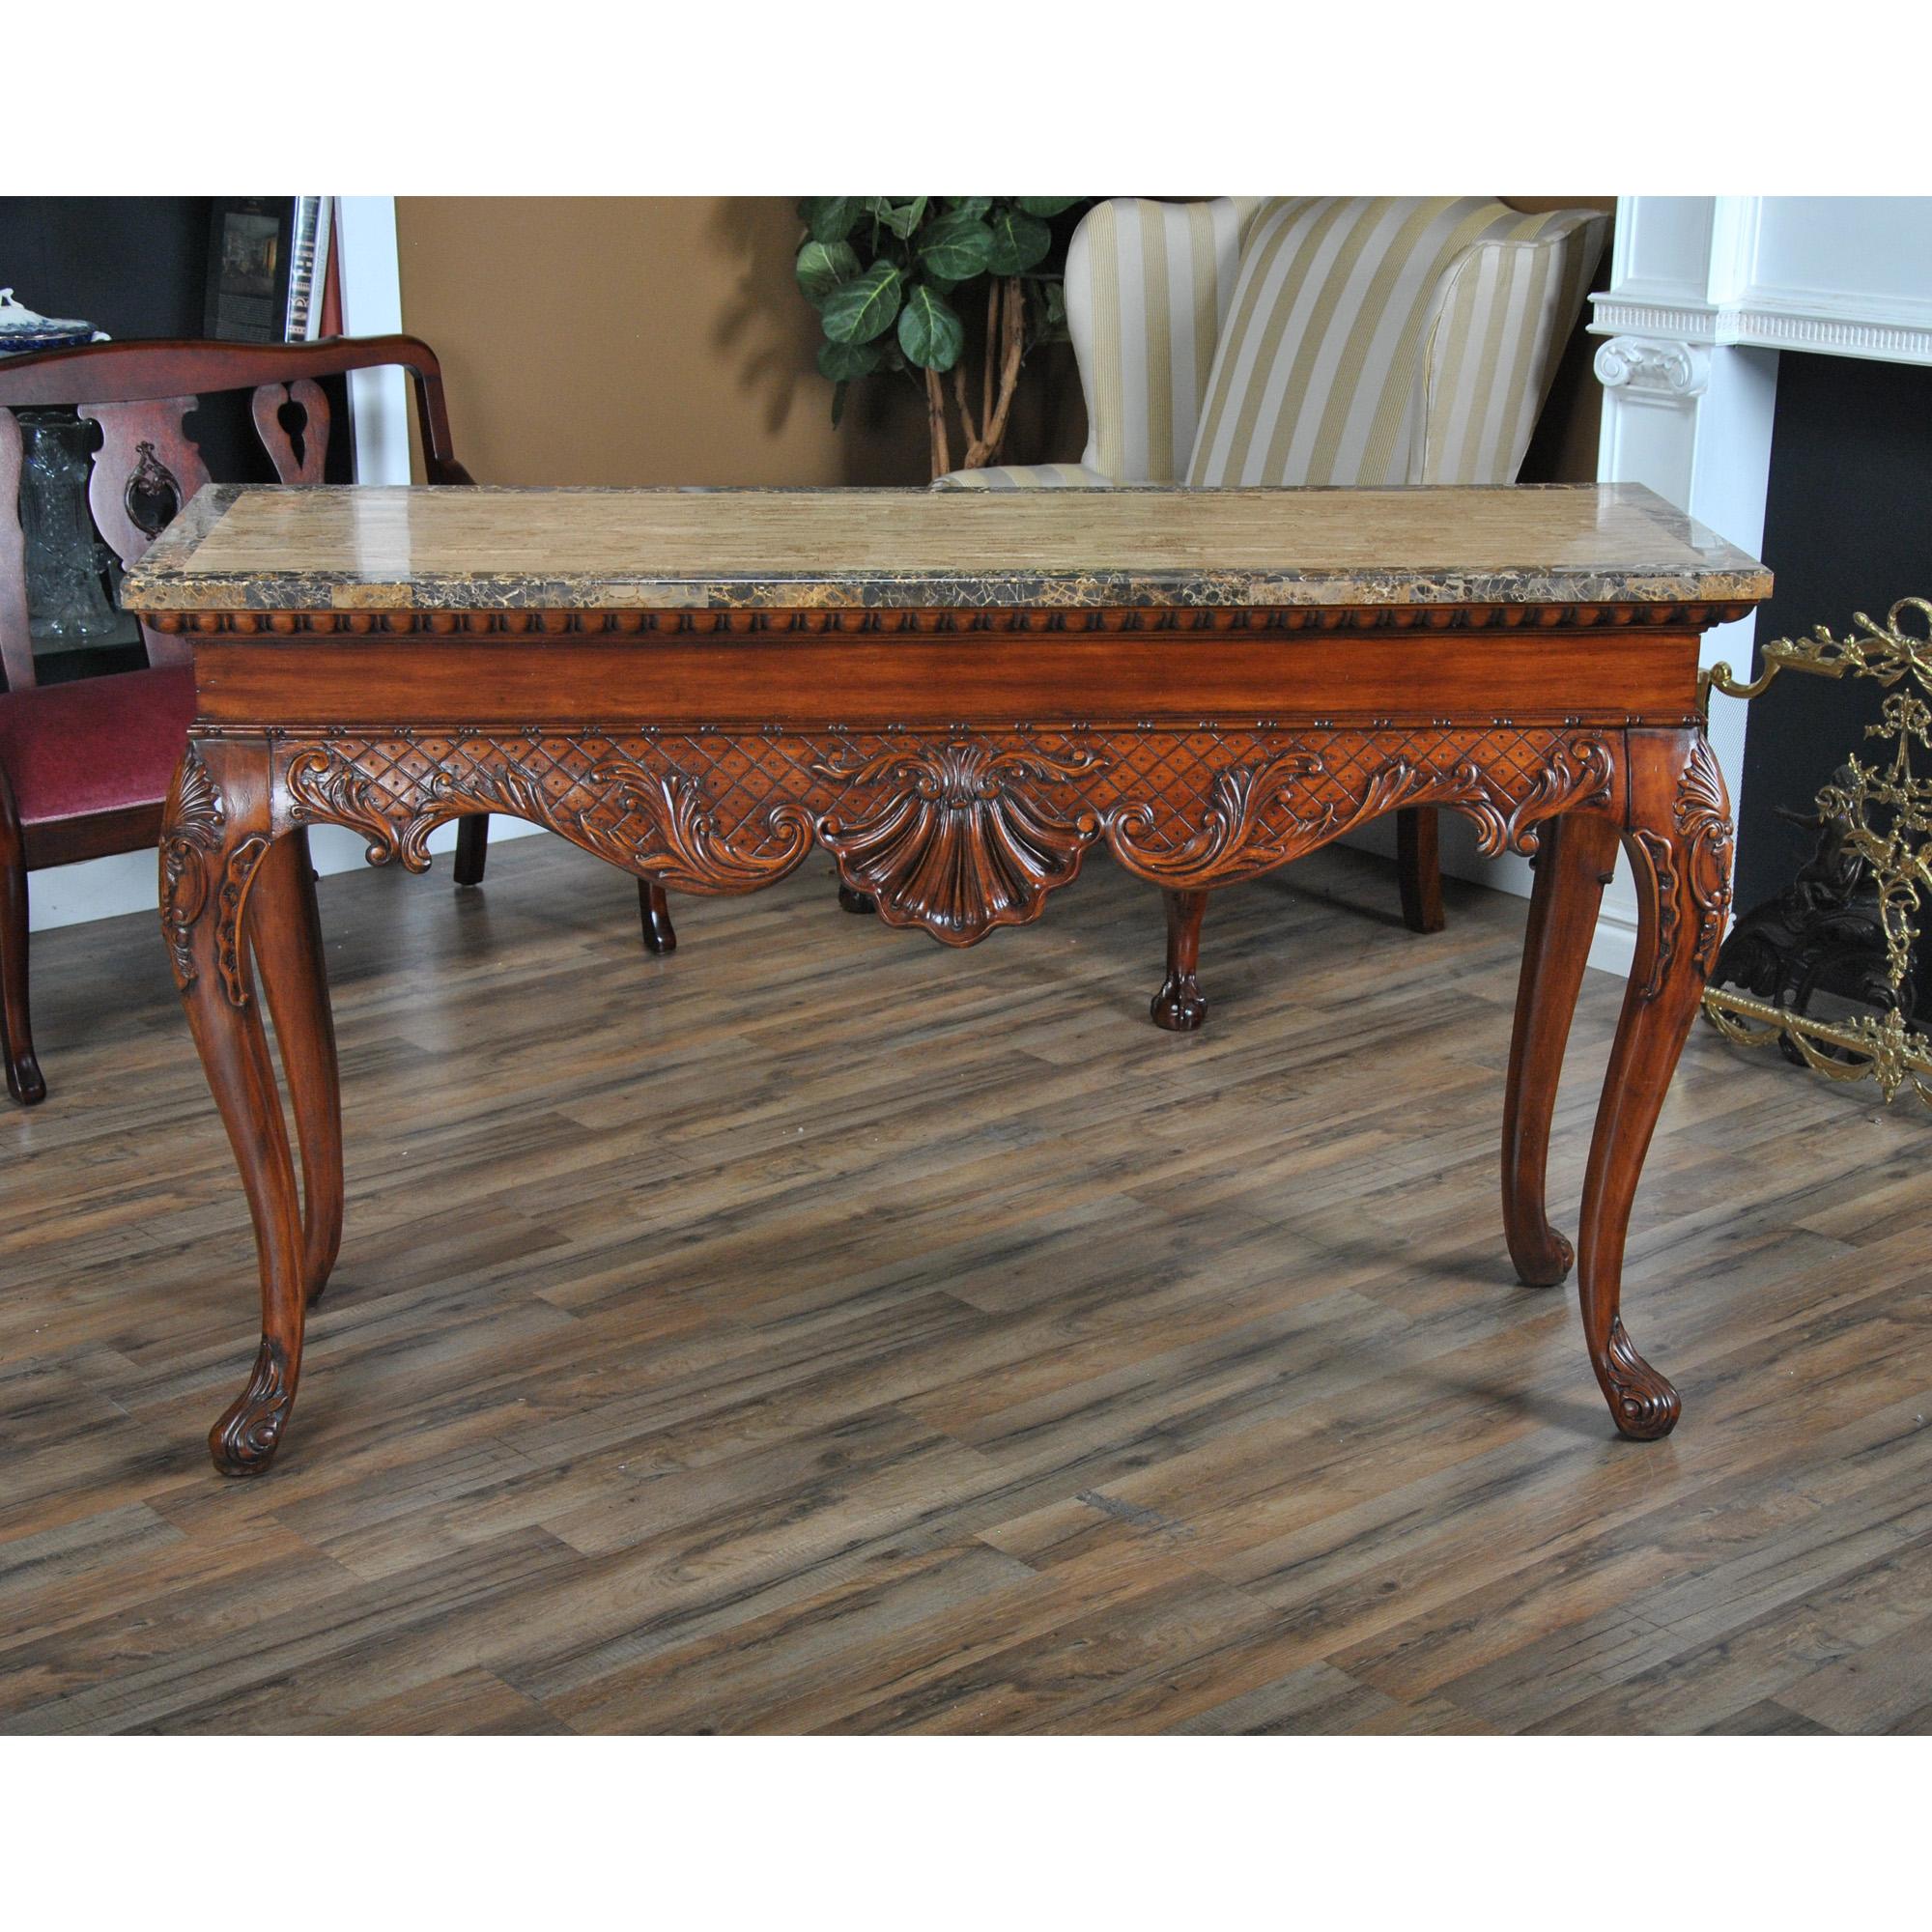 A Large Faux Marble Top Console brought to you by Niagara Furniture. This stylish piece has fantastic details throughout; all in the same original untouched condition as when it left the factory. The removable legs fit snugly into the top and create